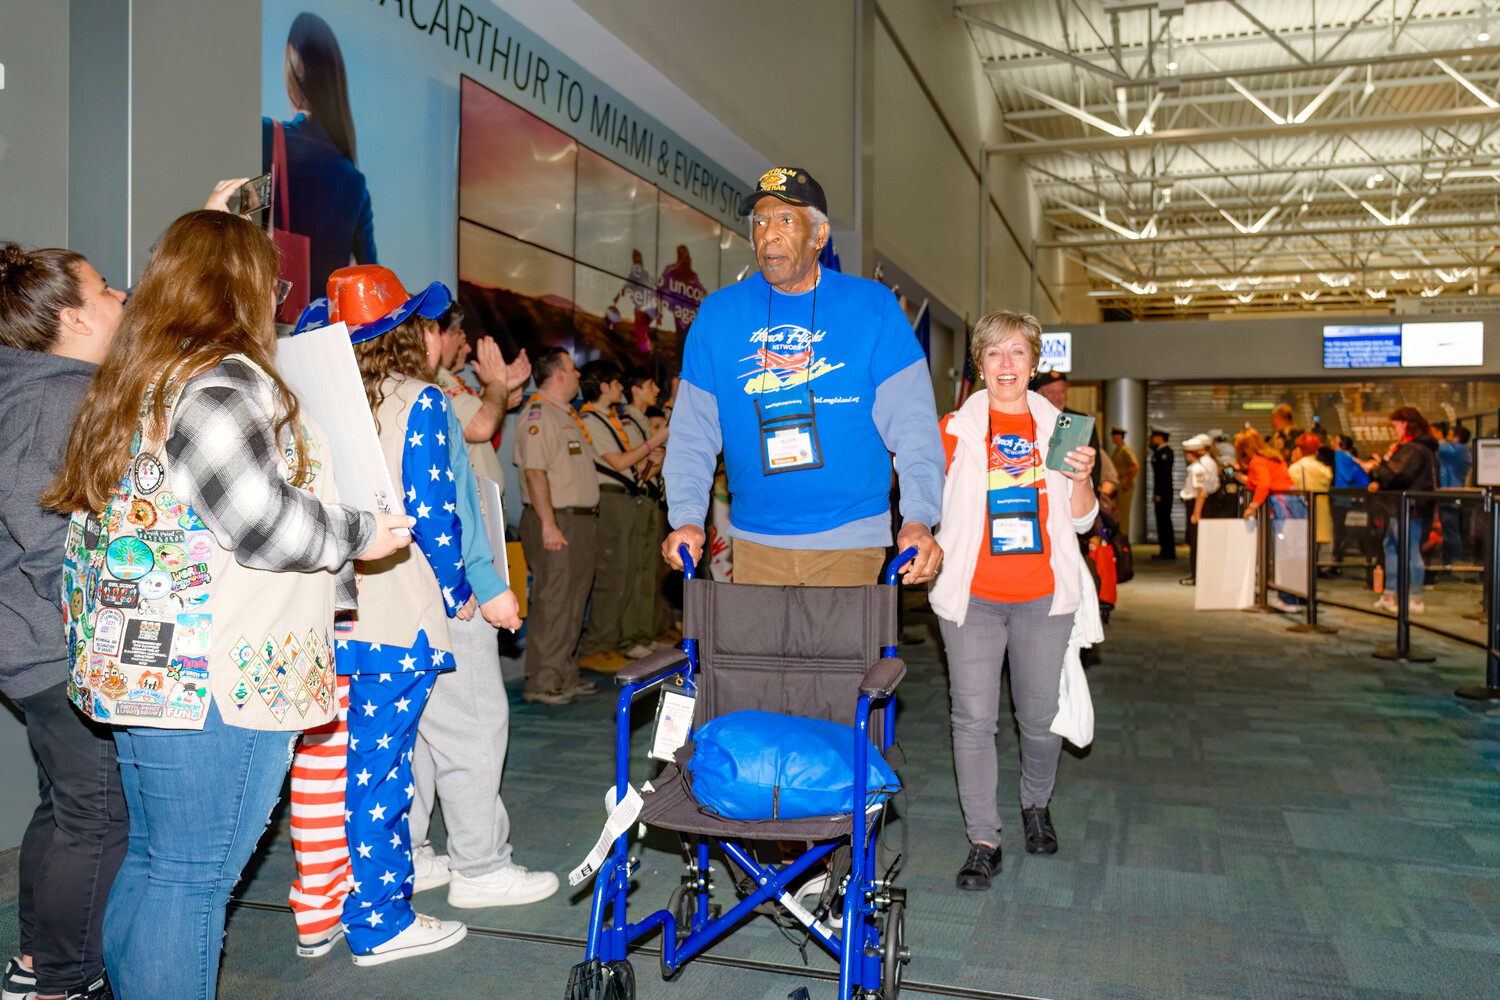 North Sea resident and Vietnam veteran Alvin Woods in Washington DC on April 29 as part of Honor Flight Long Island.